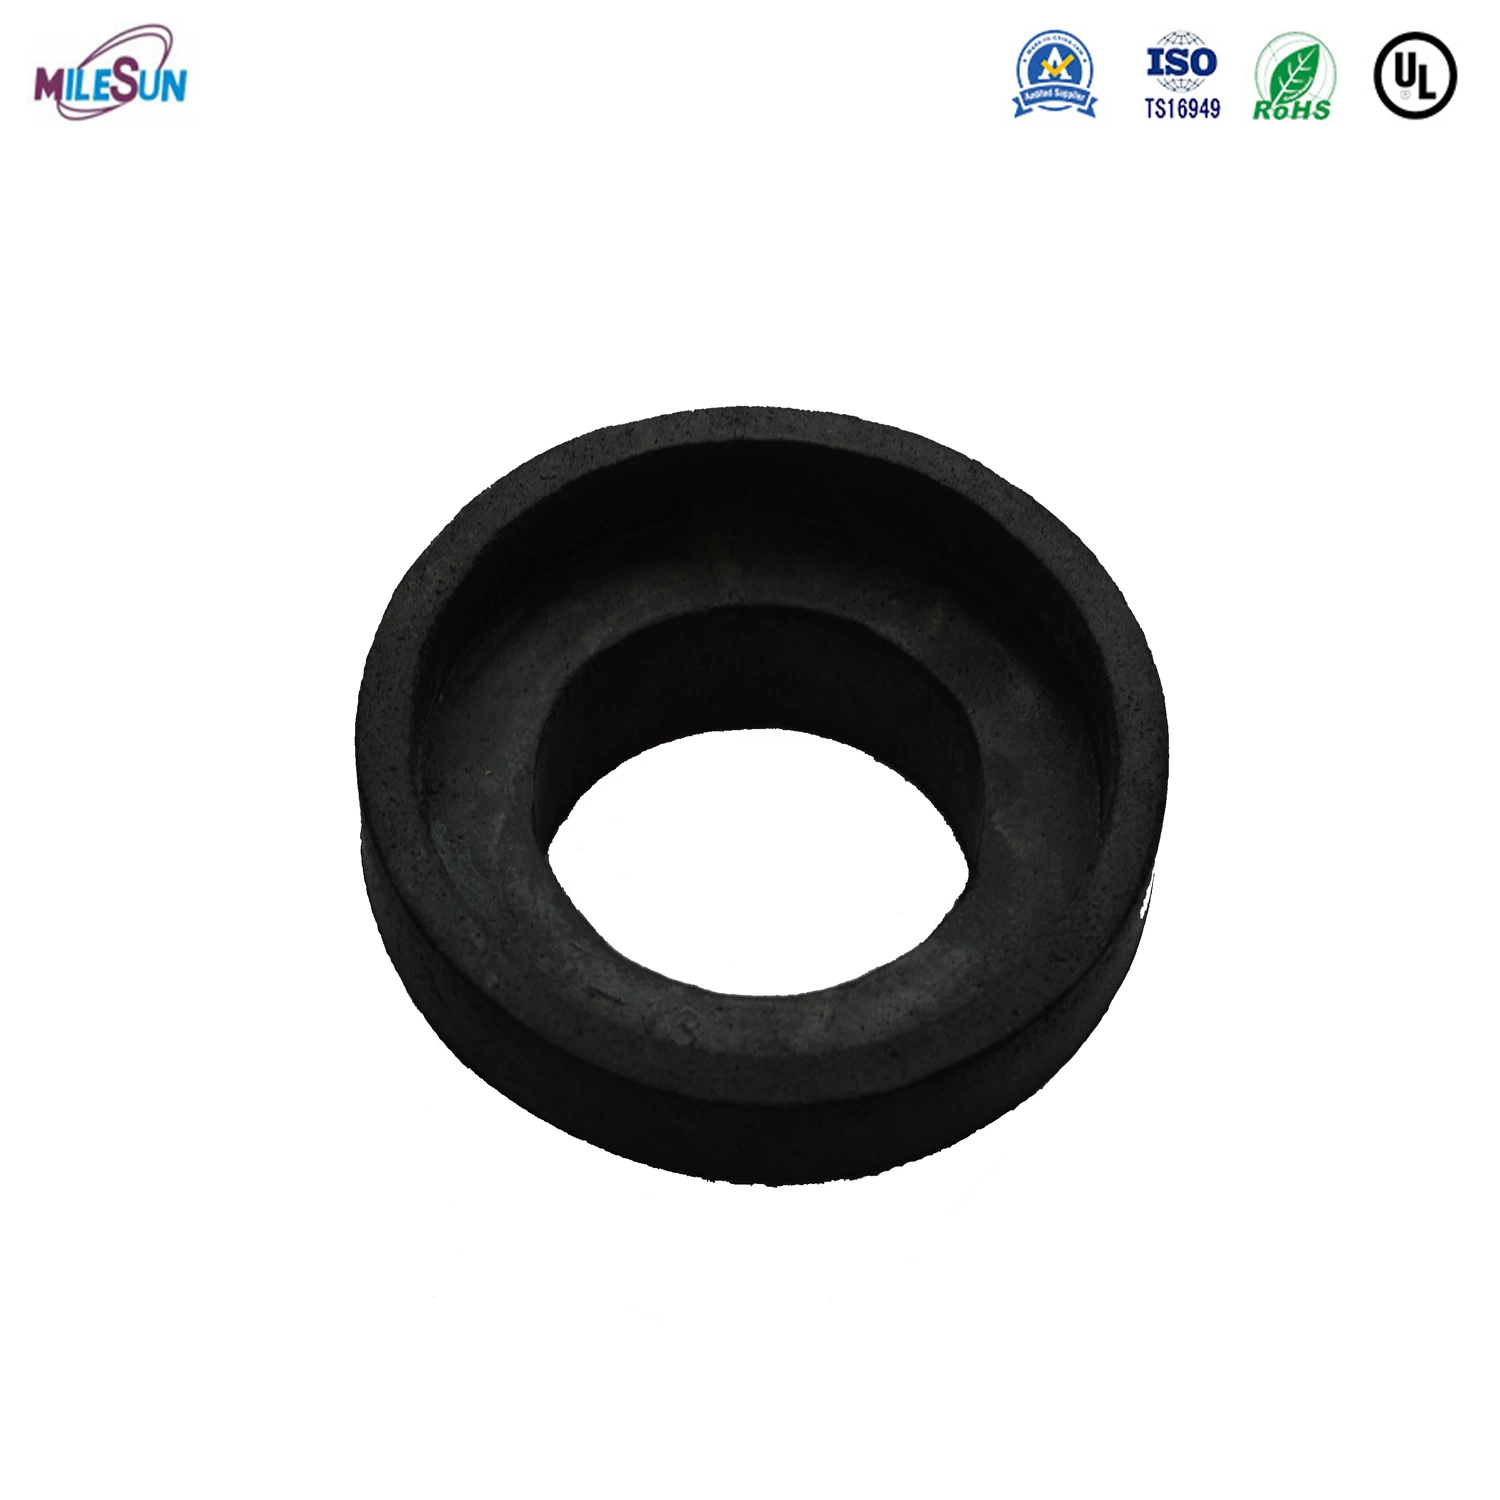 Foam Washer Black Color Rubber Products for Sanitaryware